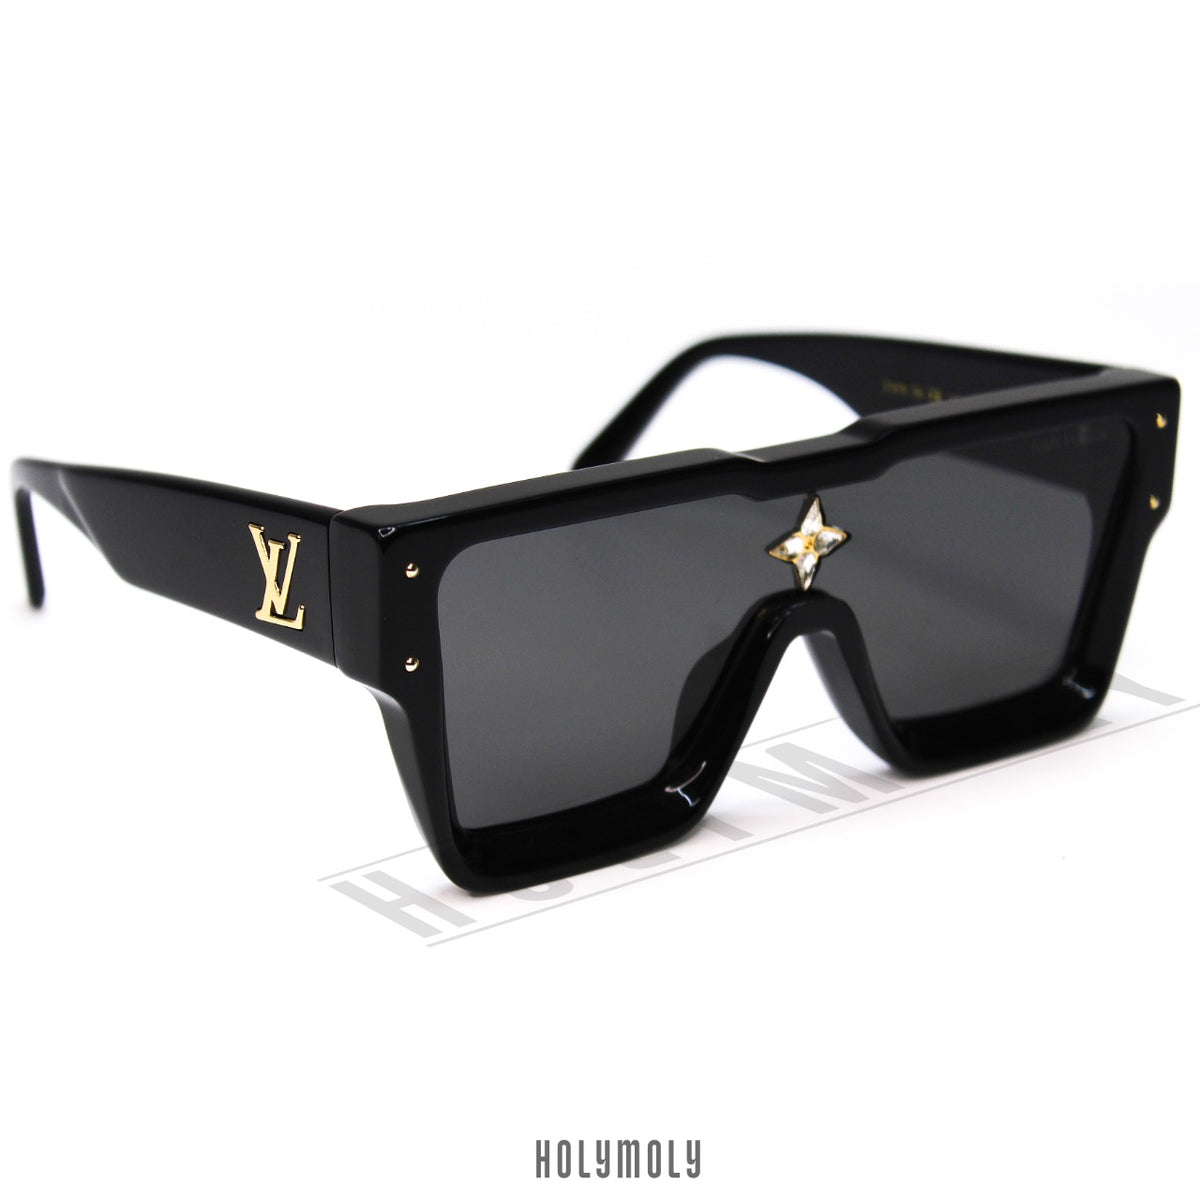 Louis Vuitton Red Cyclone Sunglasses